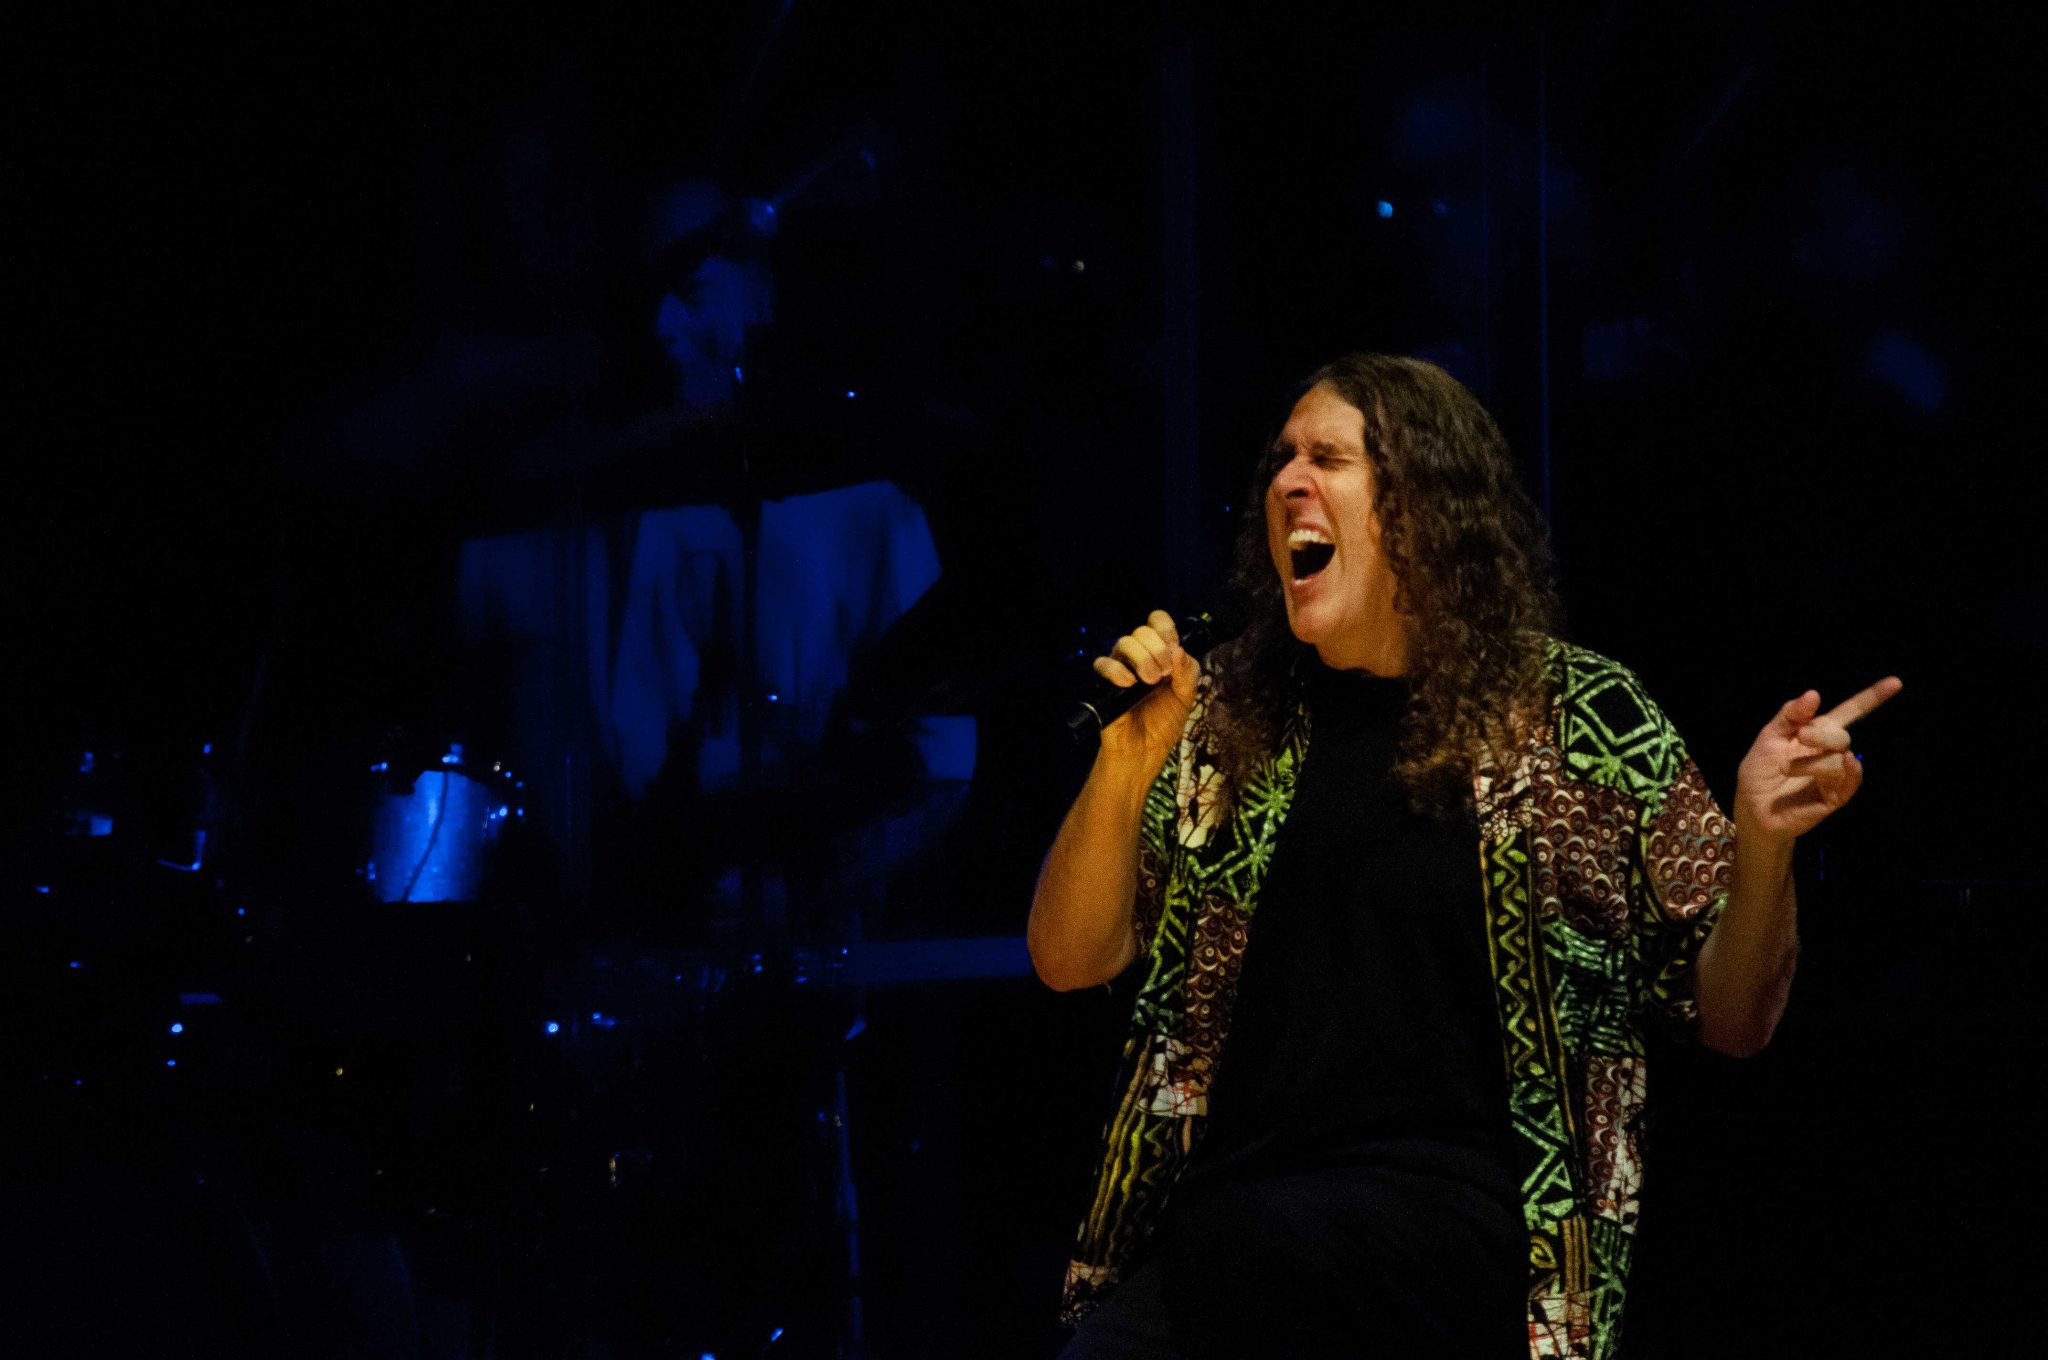 PHOTO: "Weird Al" Yankovic belting out "Like a Surgeon" on stage at the Cynthia Woods Mitchell Pavilion June 15, 2019. Photo by The Signal Managing Editor Miles Shellshear.